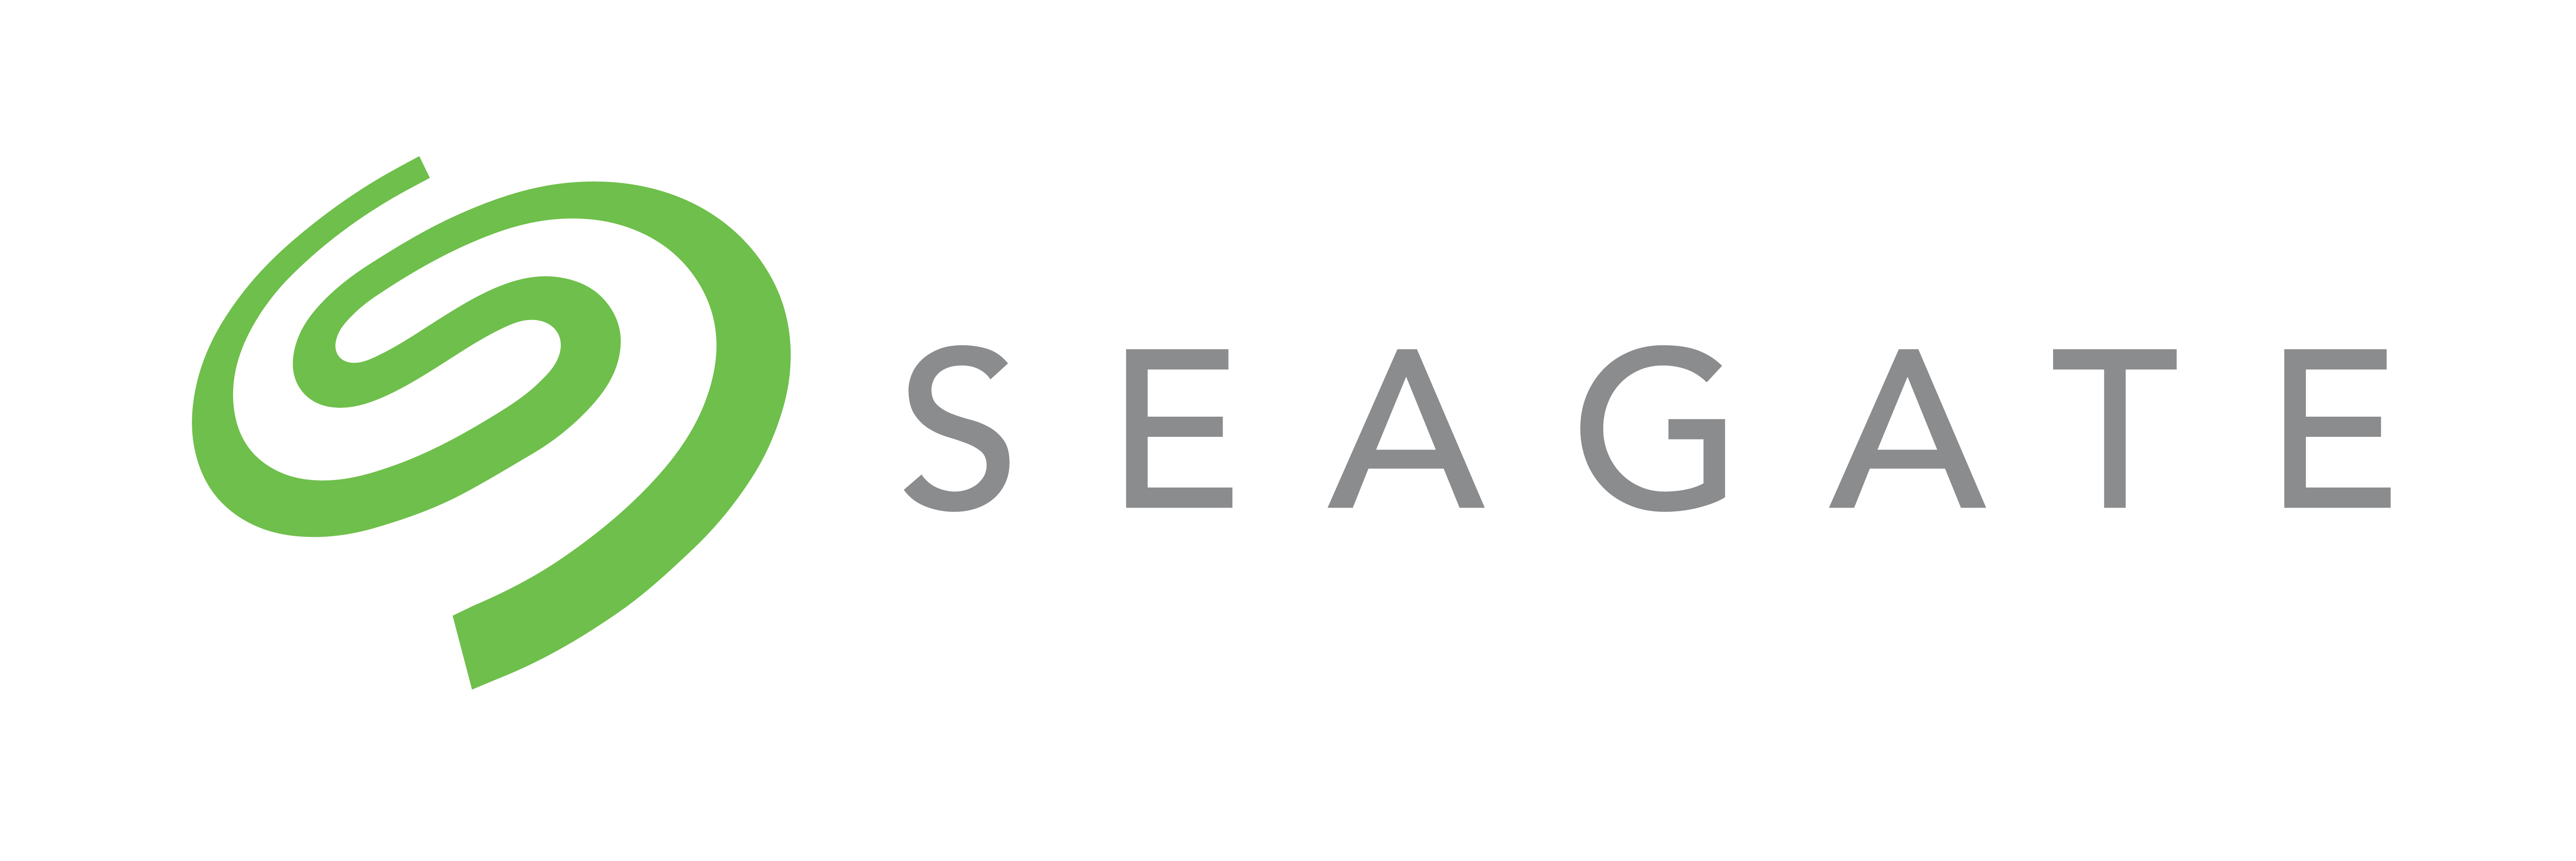 Seagate, Authorized Resellers